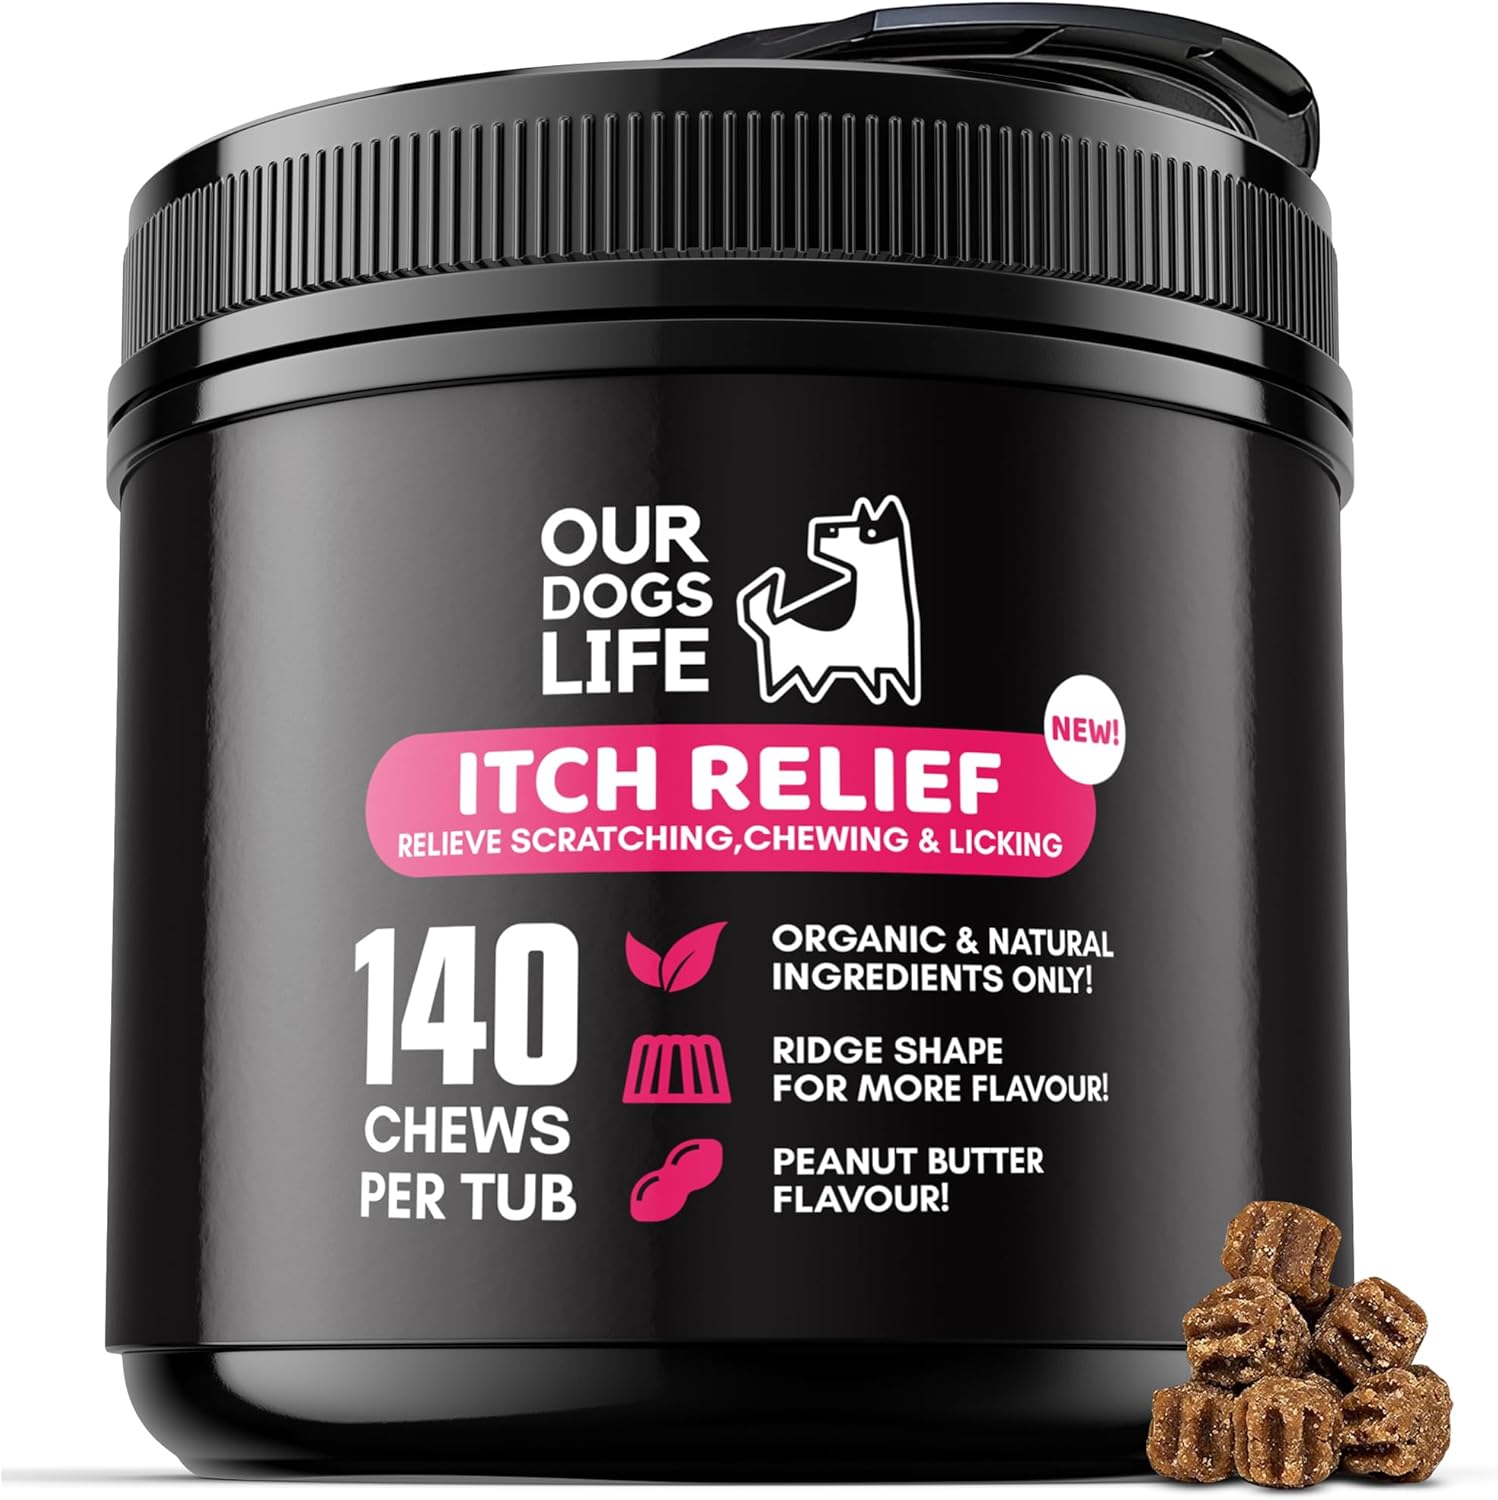 Itch Relief Supplement 140 Chews | All-Natural Organic Ridge Shape | Itchy dog skin relief, Healthy Skin & Coat Health | Veterinarian-Formulated Omega 3,6 & 9Chews | Non-GMO, No Fillers & Gluten Free